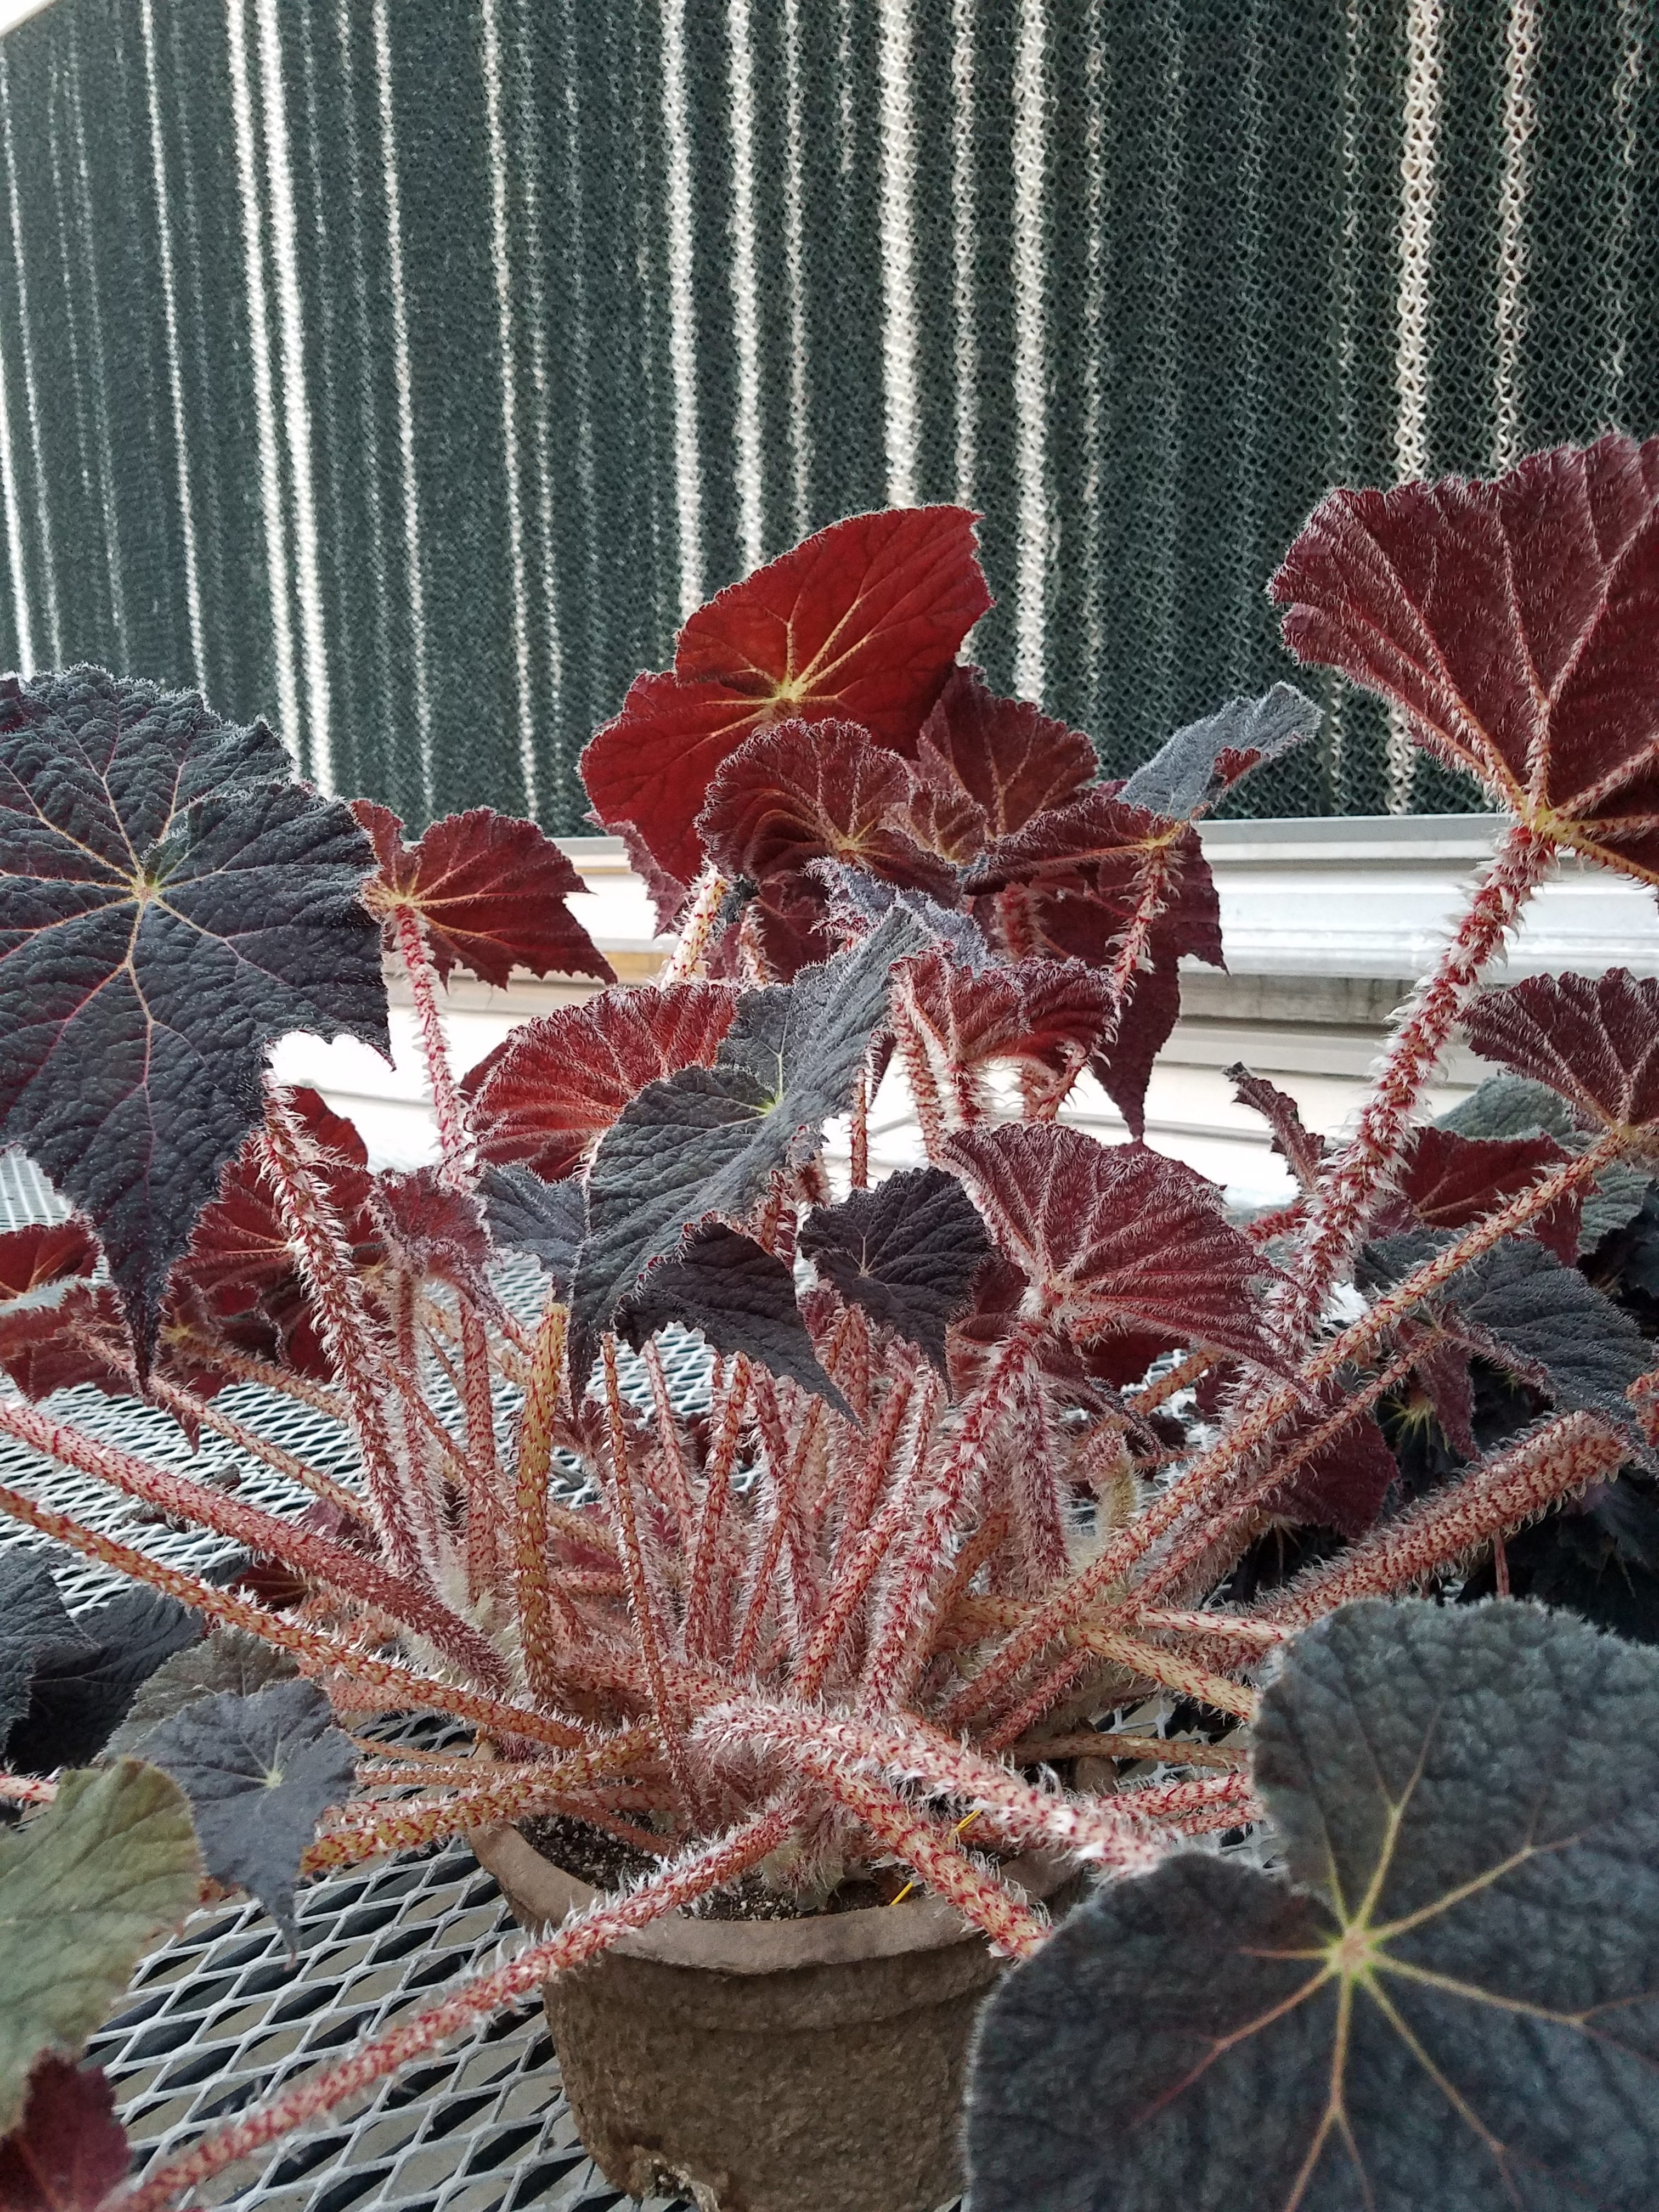 Begonia ‘Frost’s Dorothy Behrends’ full plant